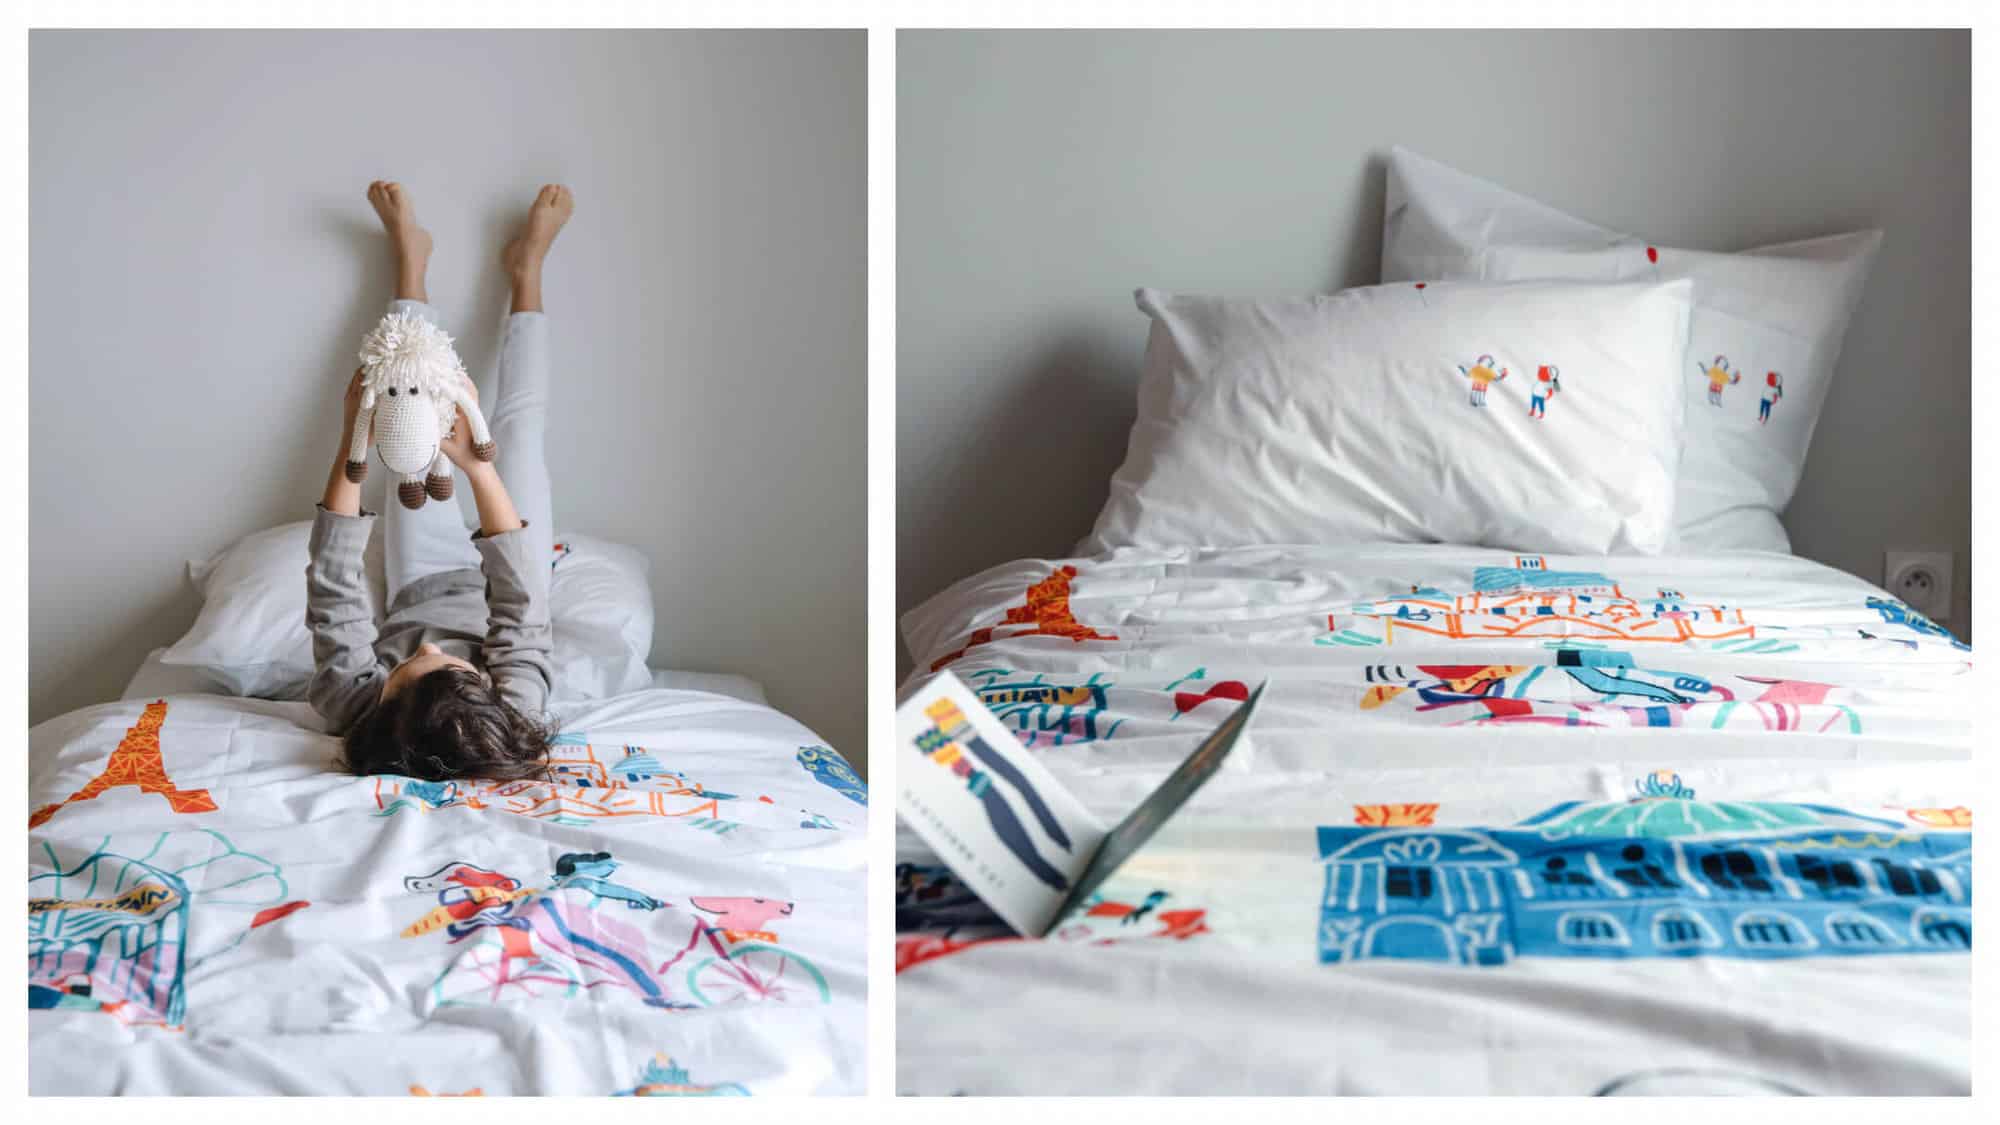 A child is lying down on a bed, with their legs up against the wall. The child is holding a stuffed animal, and the bed spread is white with large colorful images such as the Eiffel Tower. Right: The same bed is pictured without the child lying on it. 